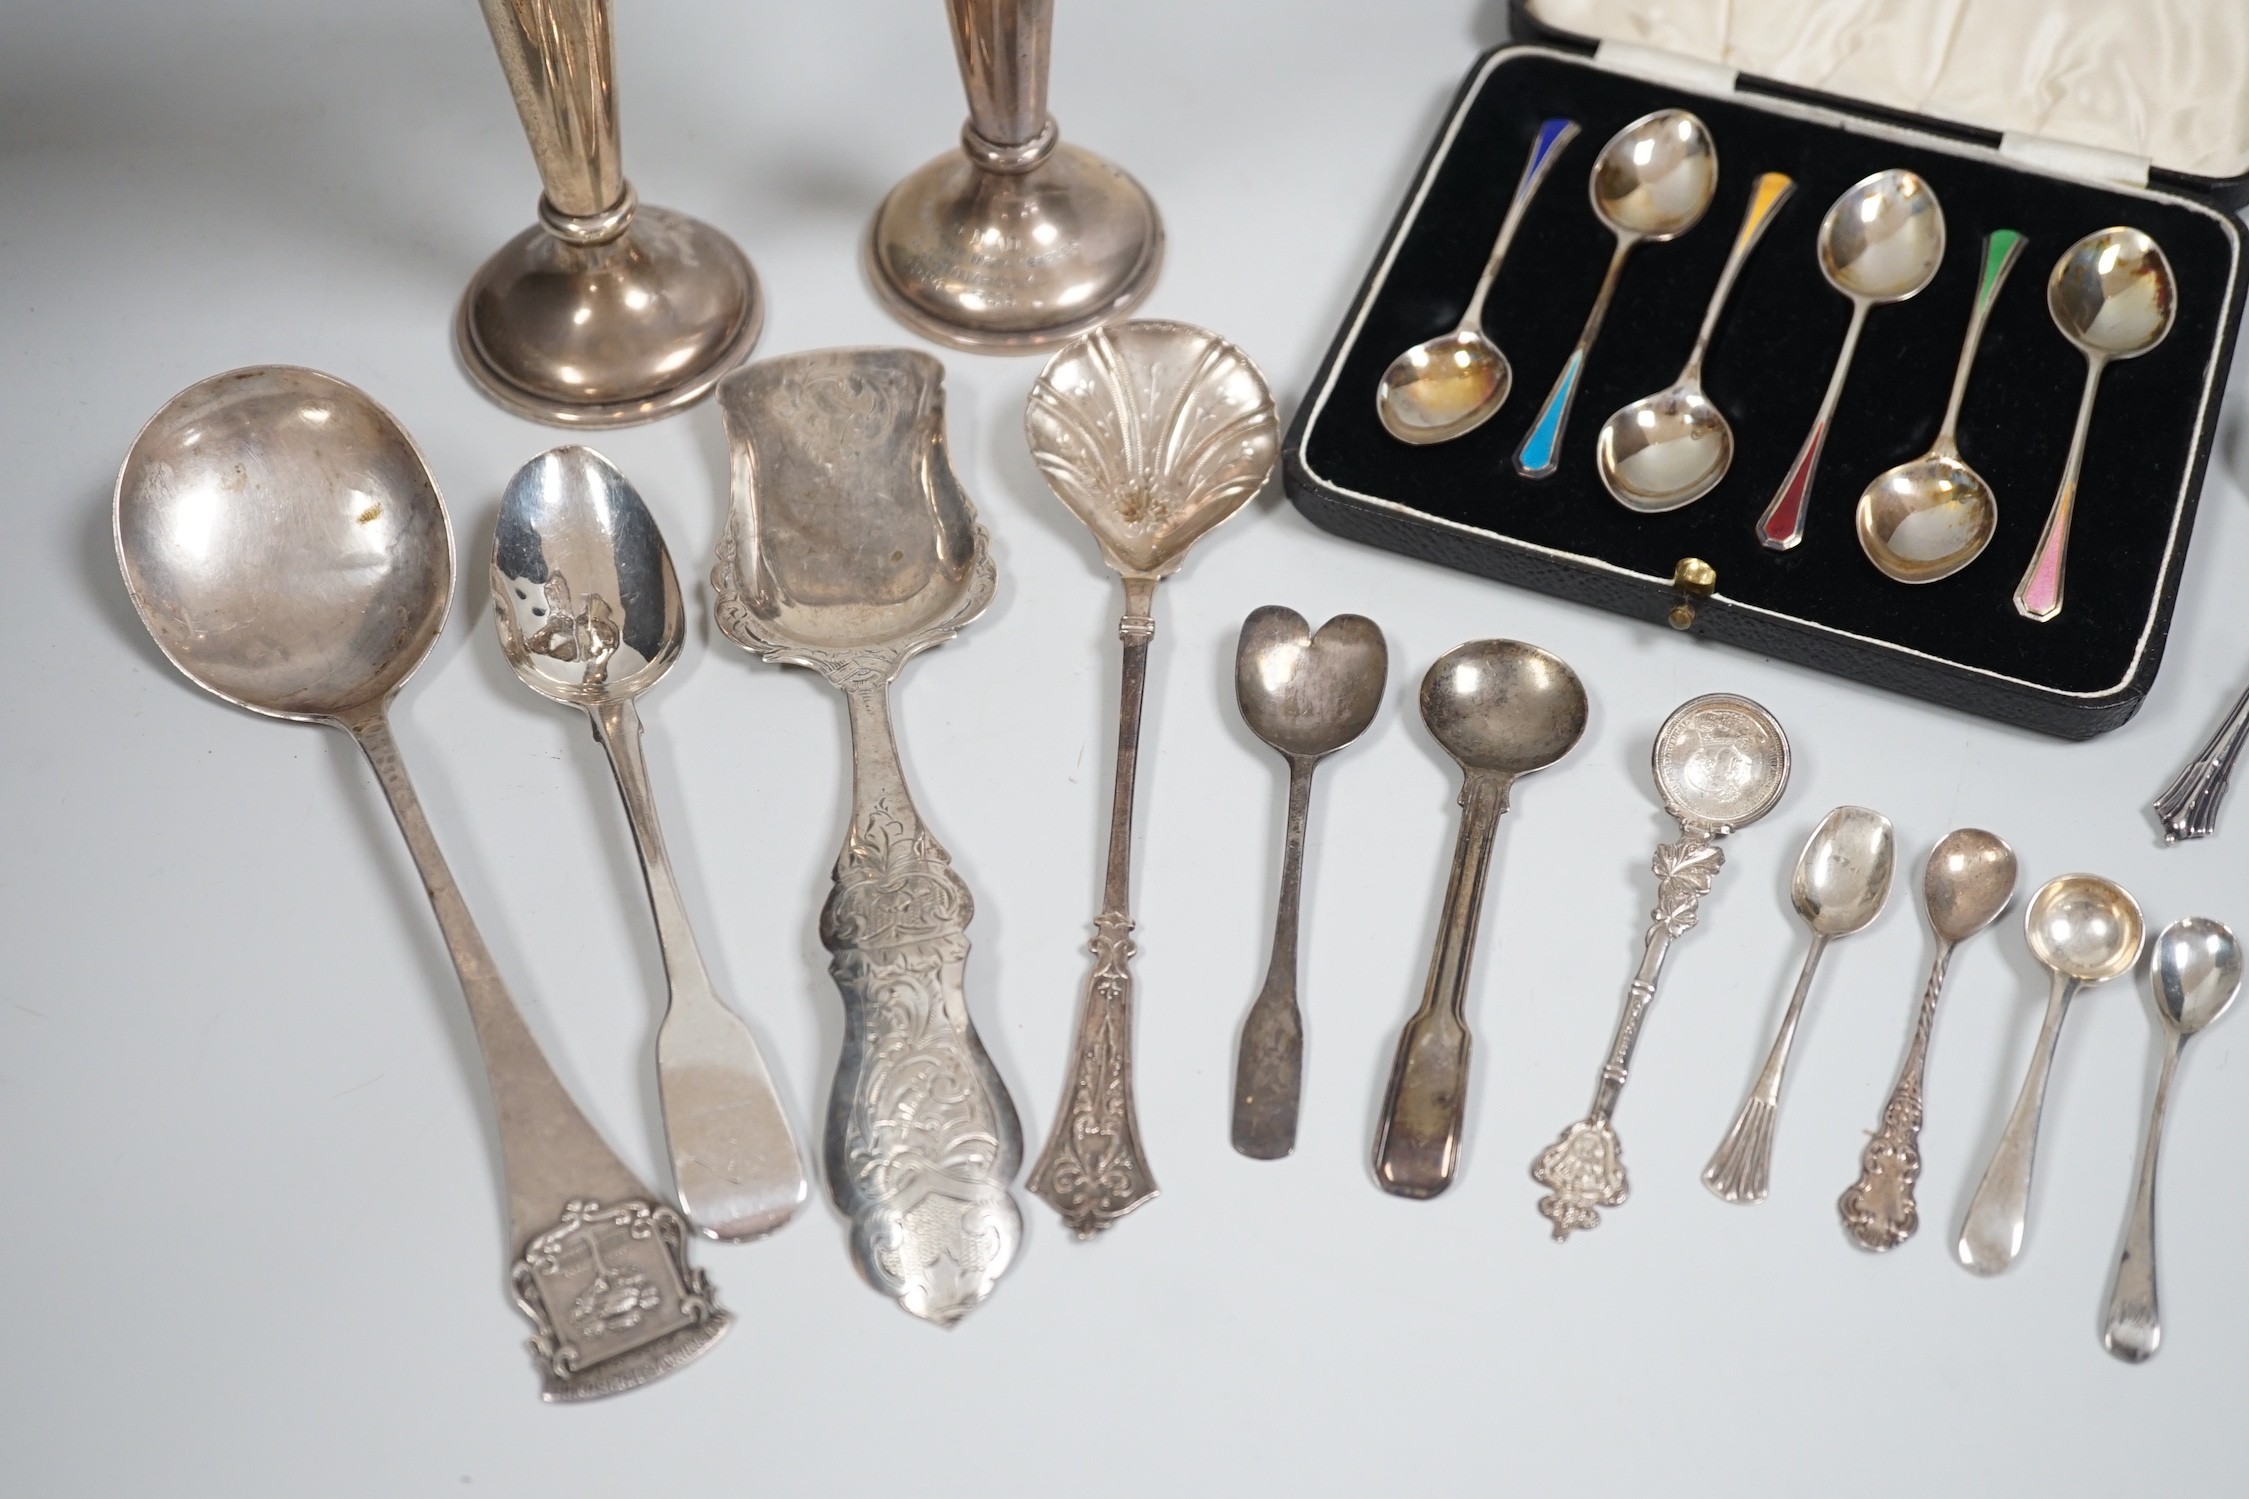 A cased set of six Edwardian silver and enamel teaspoons, William Hair Haseler, Birmingham,1913 and a collection of silver spoons and two silver mounted specimen vases.